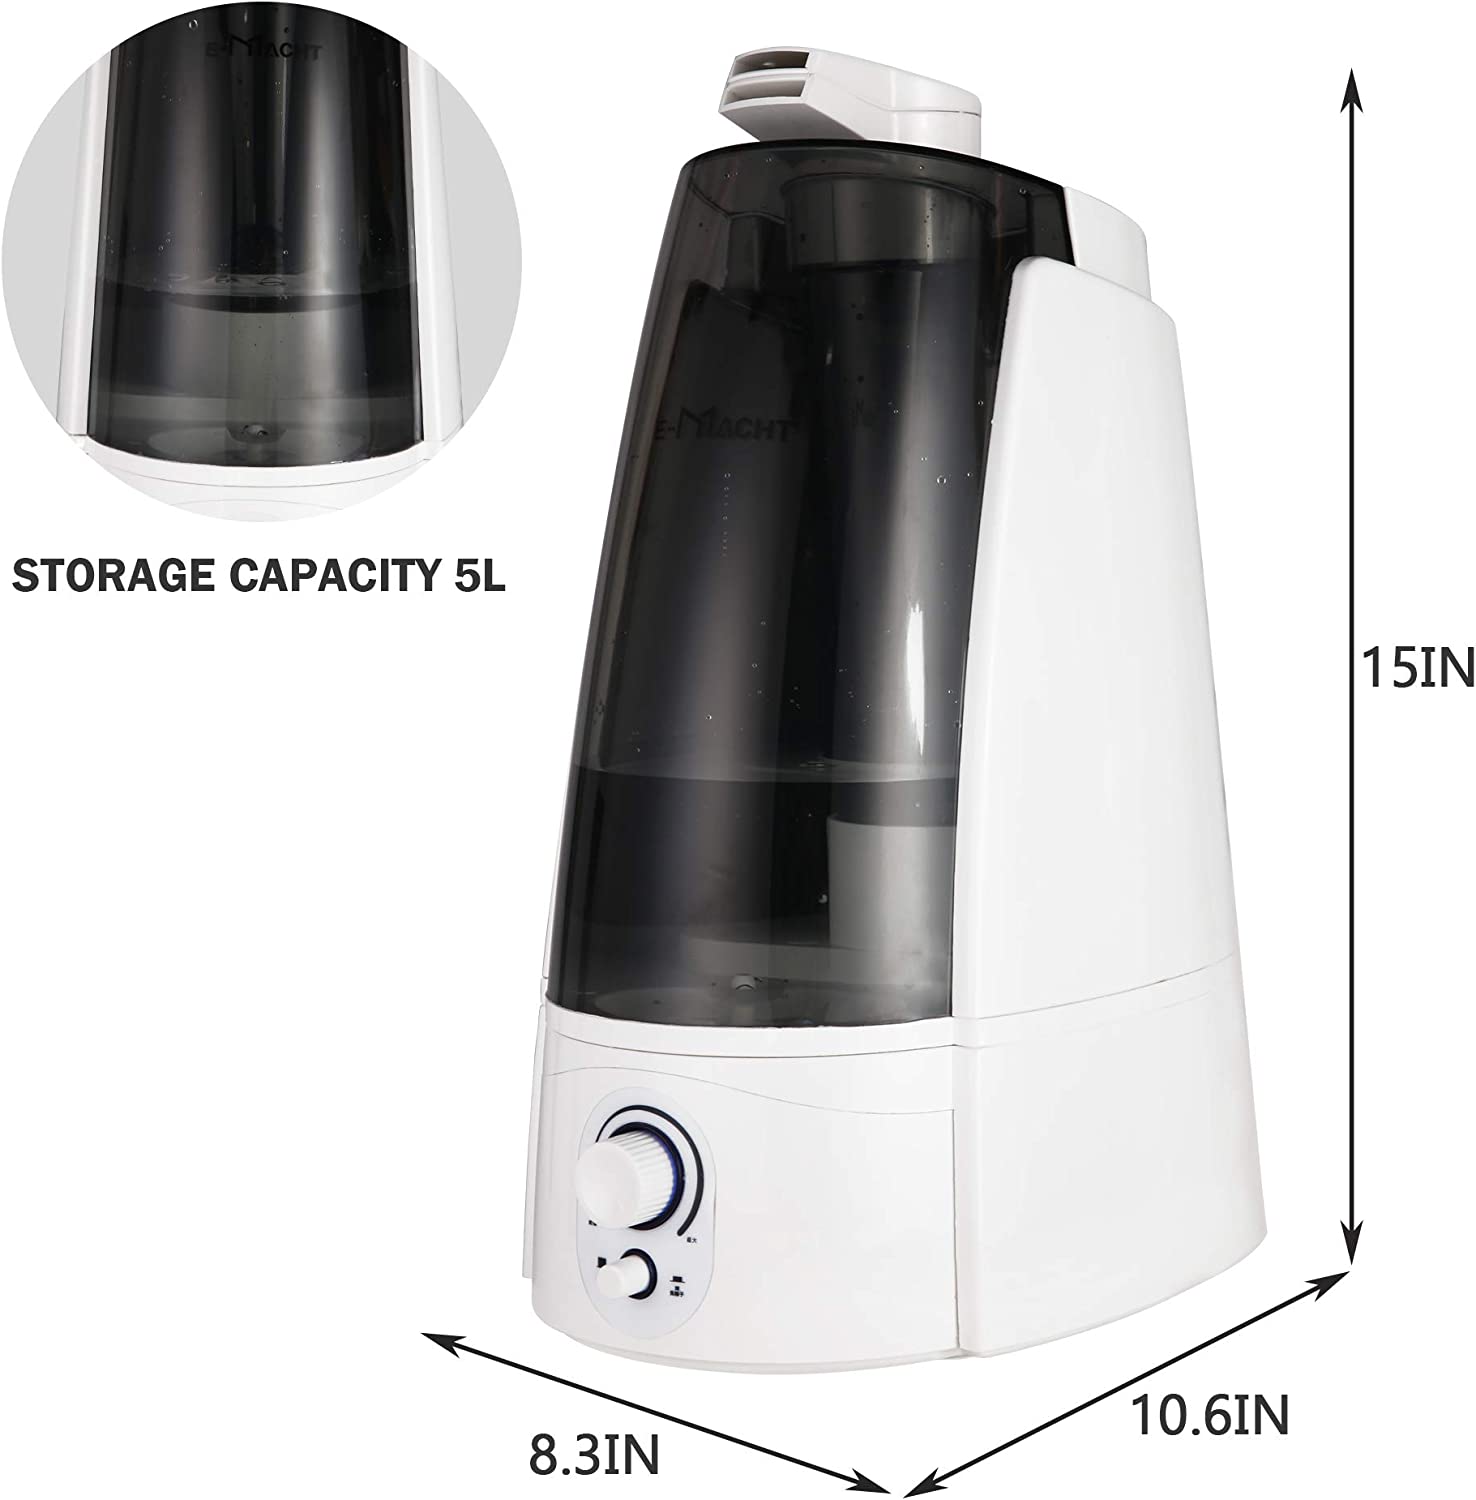 Quiet Ultrasonic Cool Mist Humidifier 5L with Auto Shut-Off Adjustable Mist Output, Black